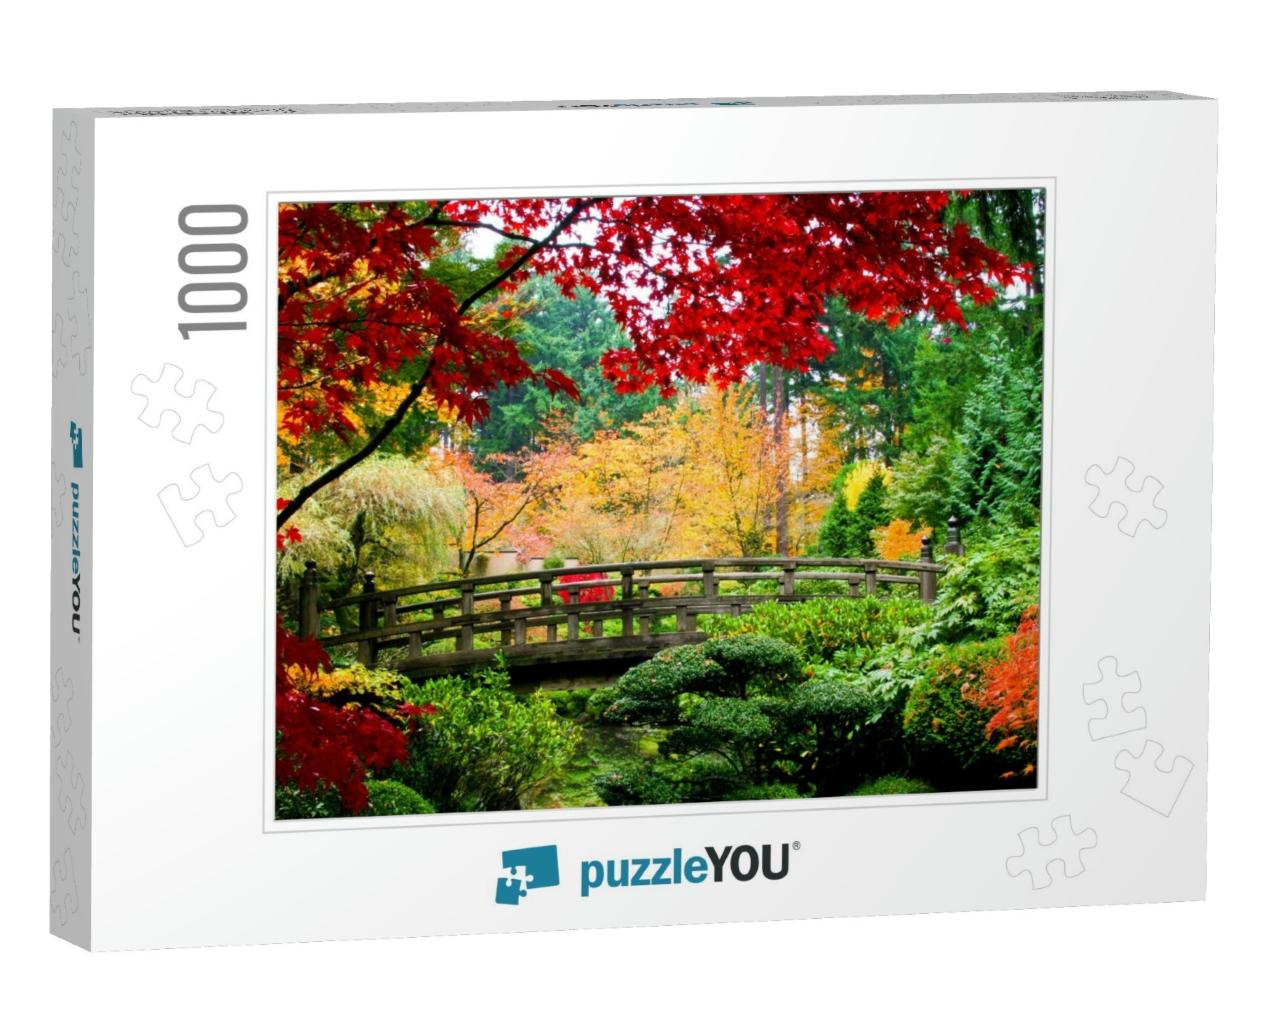 A Bridge in a Japanese Garden During Fall Season... Jigsaw Puzzle with 1000 pieces